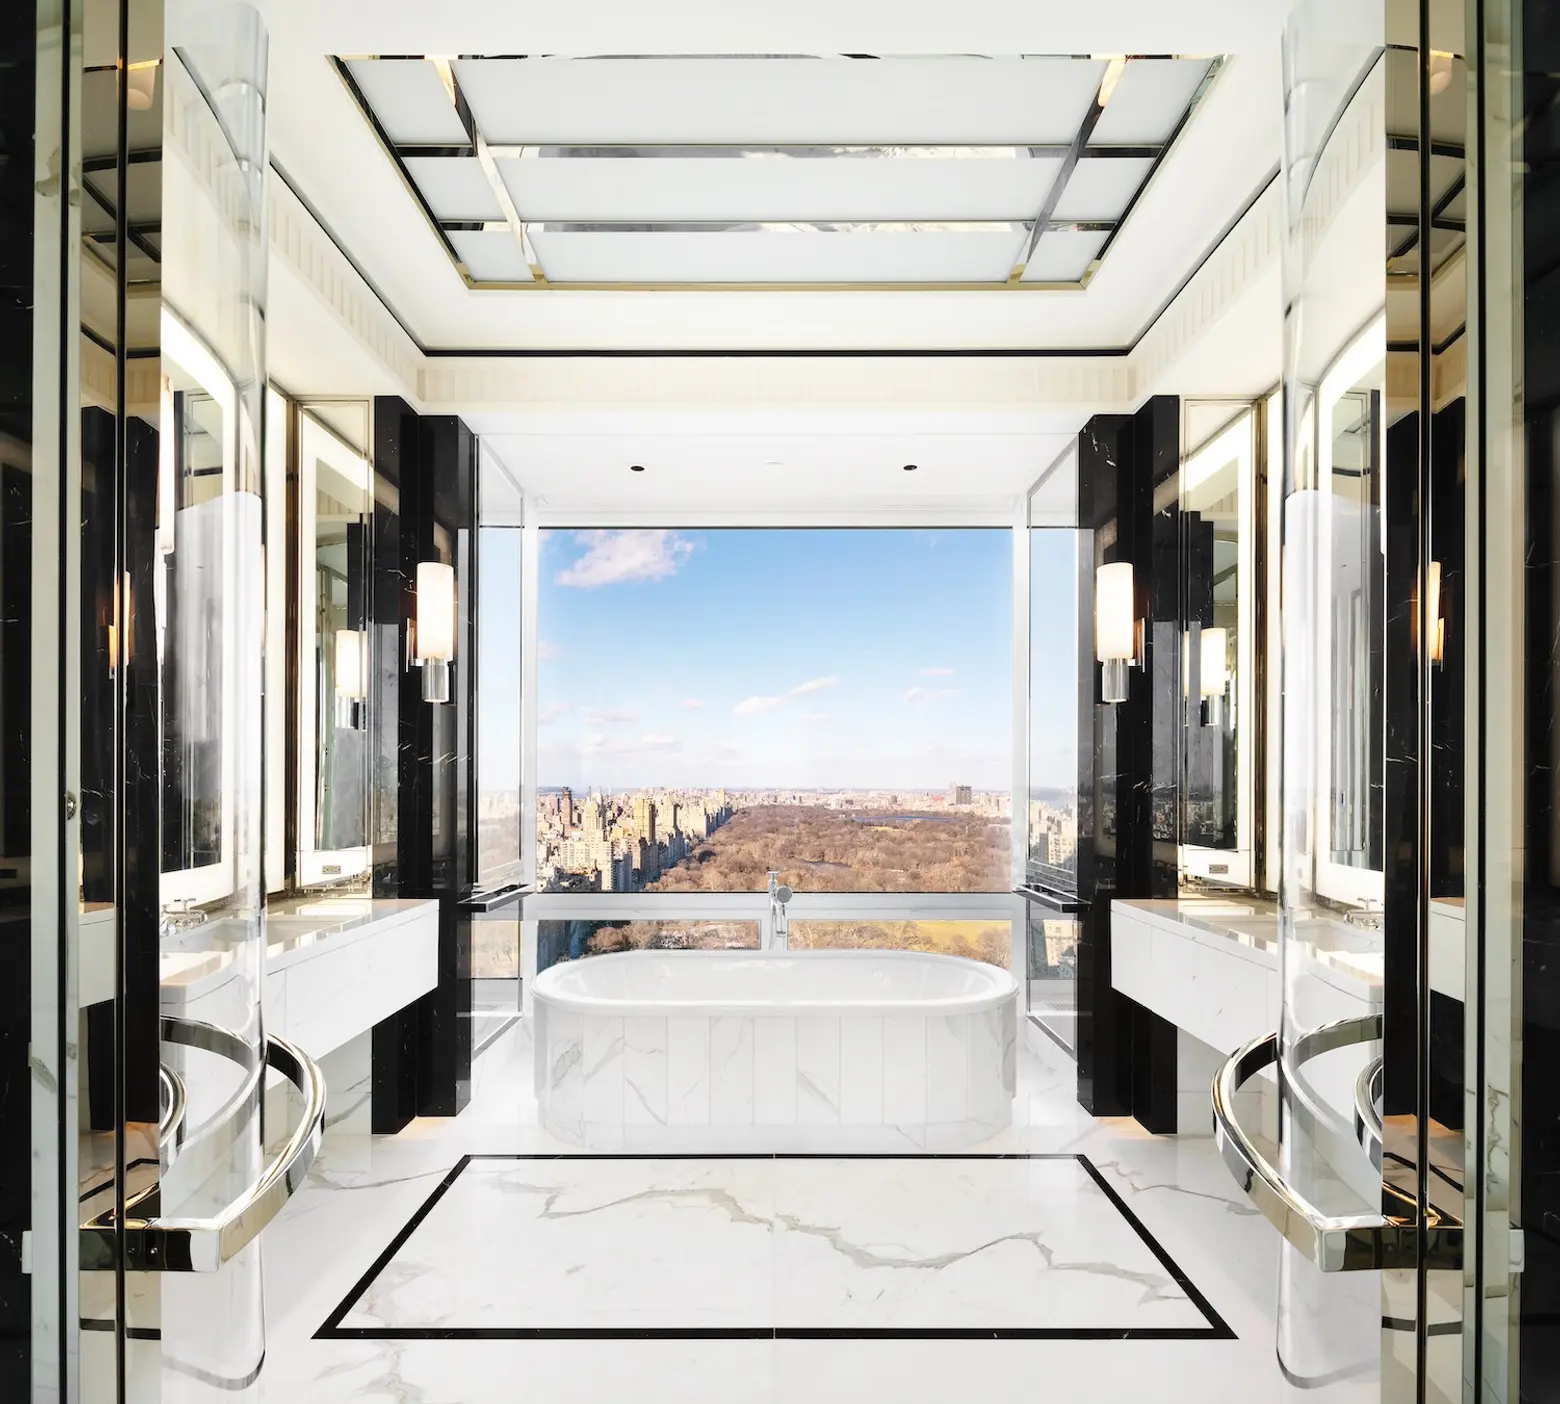 Get a rare look inside 220 Central Park South thanks to this $59K/month rental